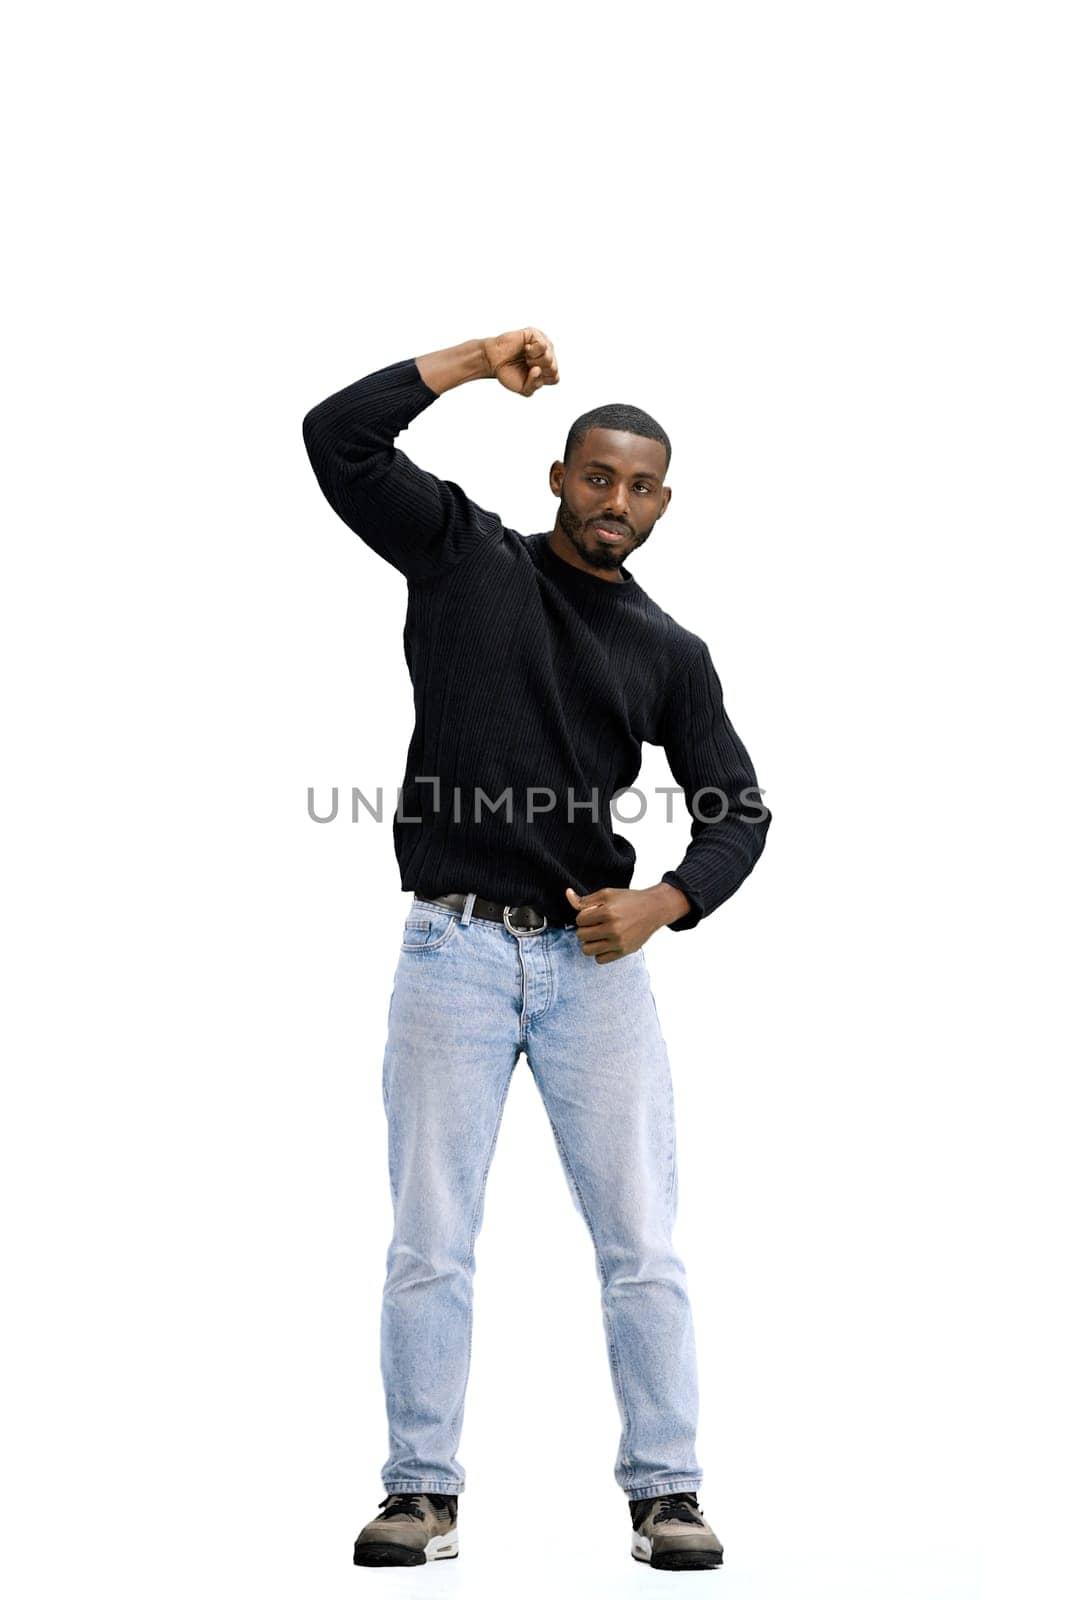 A man, full-length, on a white background, raises his hand up.